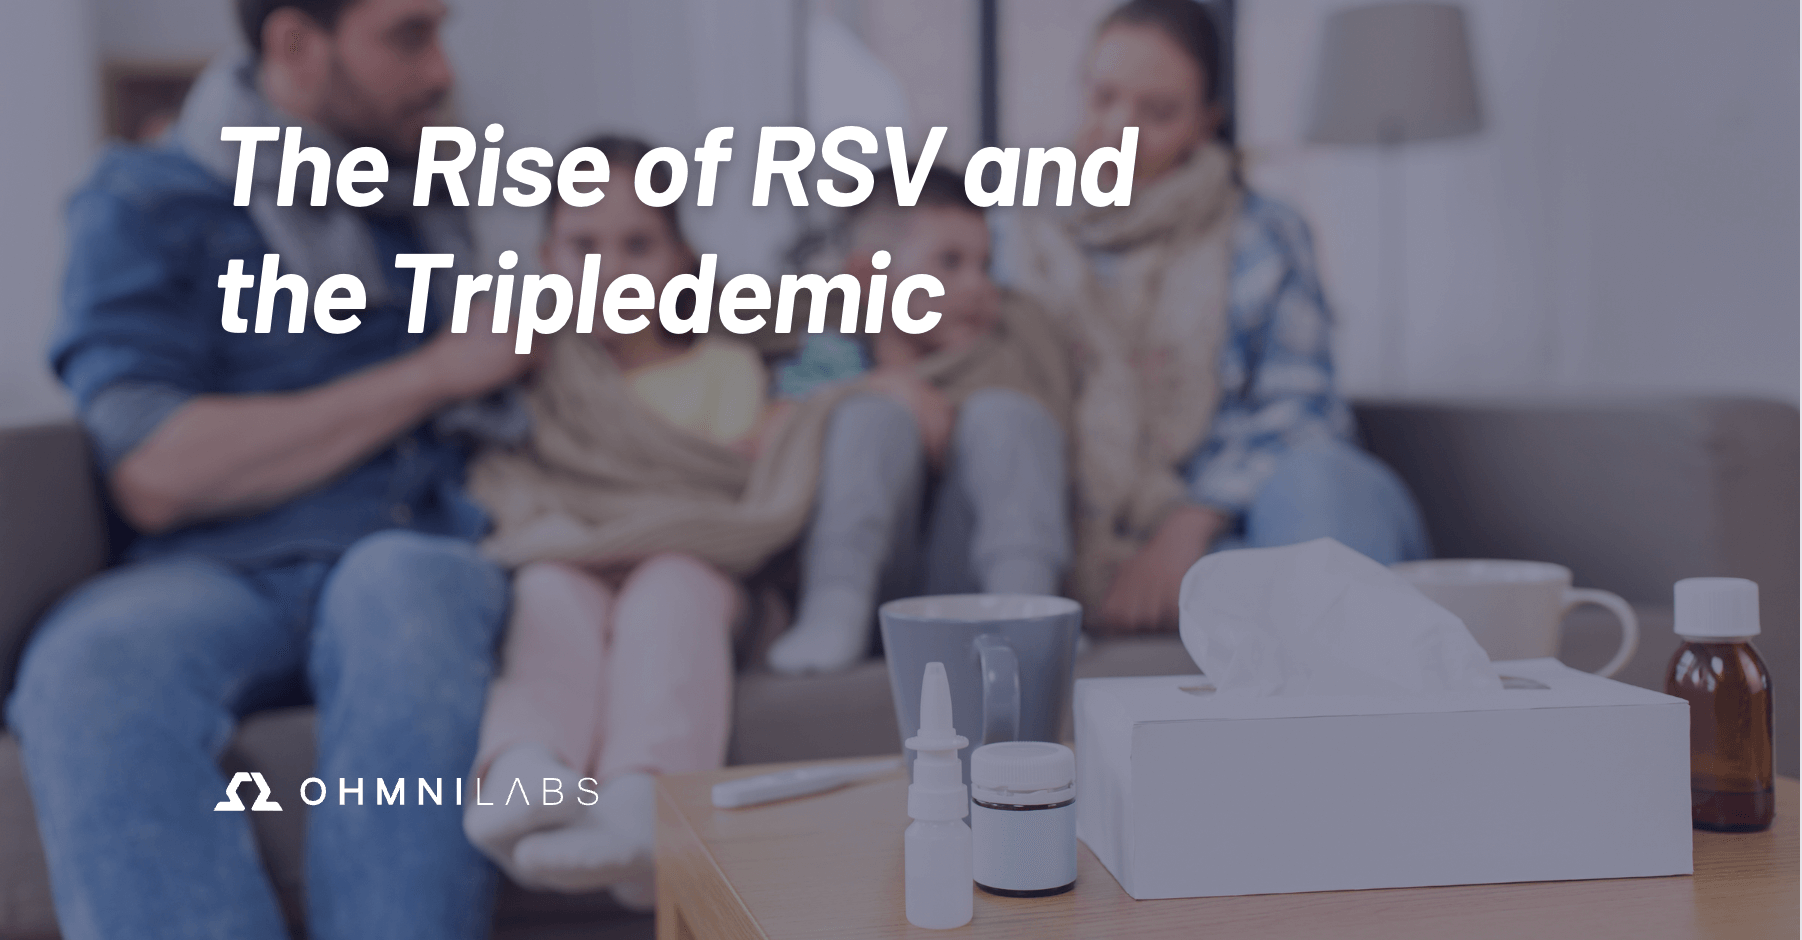 Image of sick family with the blog post title "The Rise of RSV and the Tripledemic"